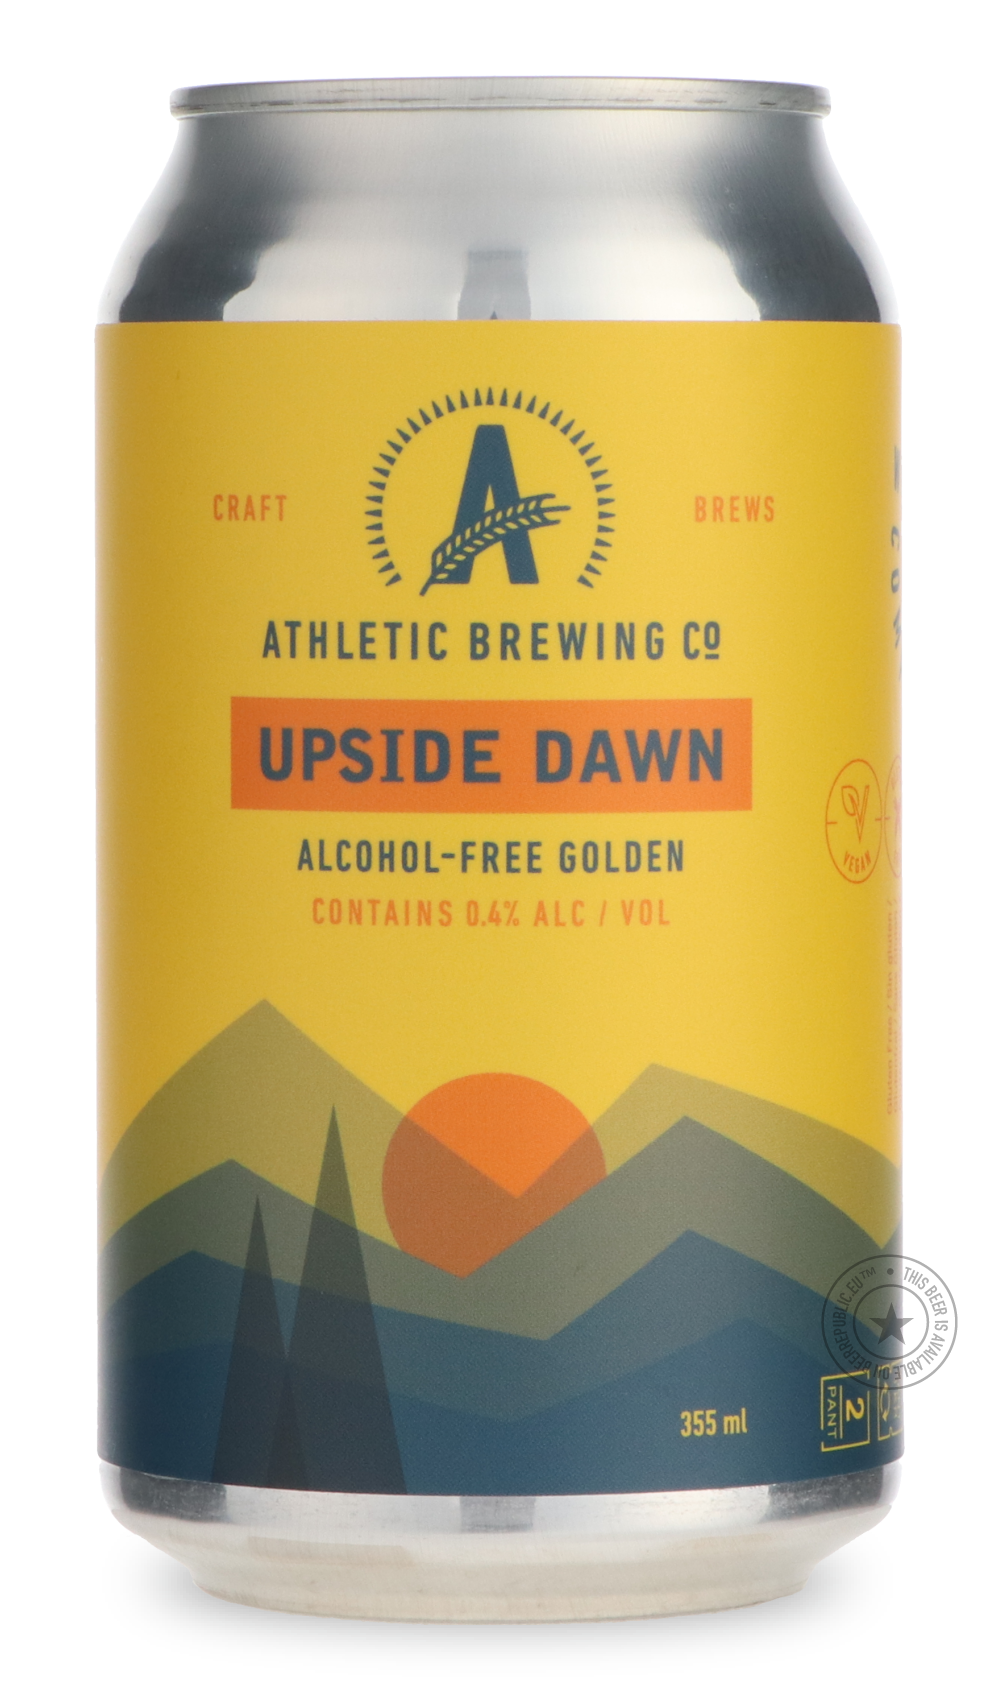 -Athletic- Upside Dawn Golden-Specials- Only @ Beer Republic - The best online beer store for American & Canadian craft beer - Buy beer online from the USA and Canada - Bier online kopen - Amerikaans bier kopen - Craft beer store - Craft beer kopen - Amerikanisch bier kaufen - Bier online kaufen - Acheter biere online - IPA - Stout - Porter - New England IPA - Hazy IPA - Imperial Stout - Barrel Aged - Barrel Aged Imperial Stout - Brown - Dark beer - Blond - Blonde - Pilsner - Lager - Wheat - Weizen - Amber 